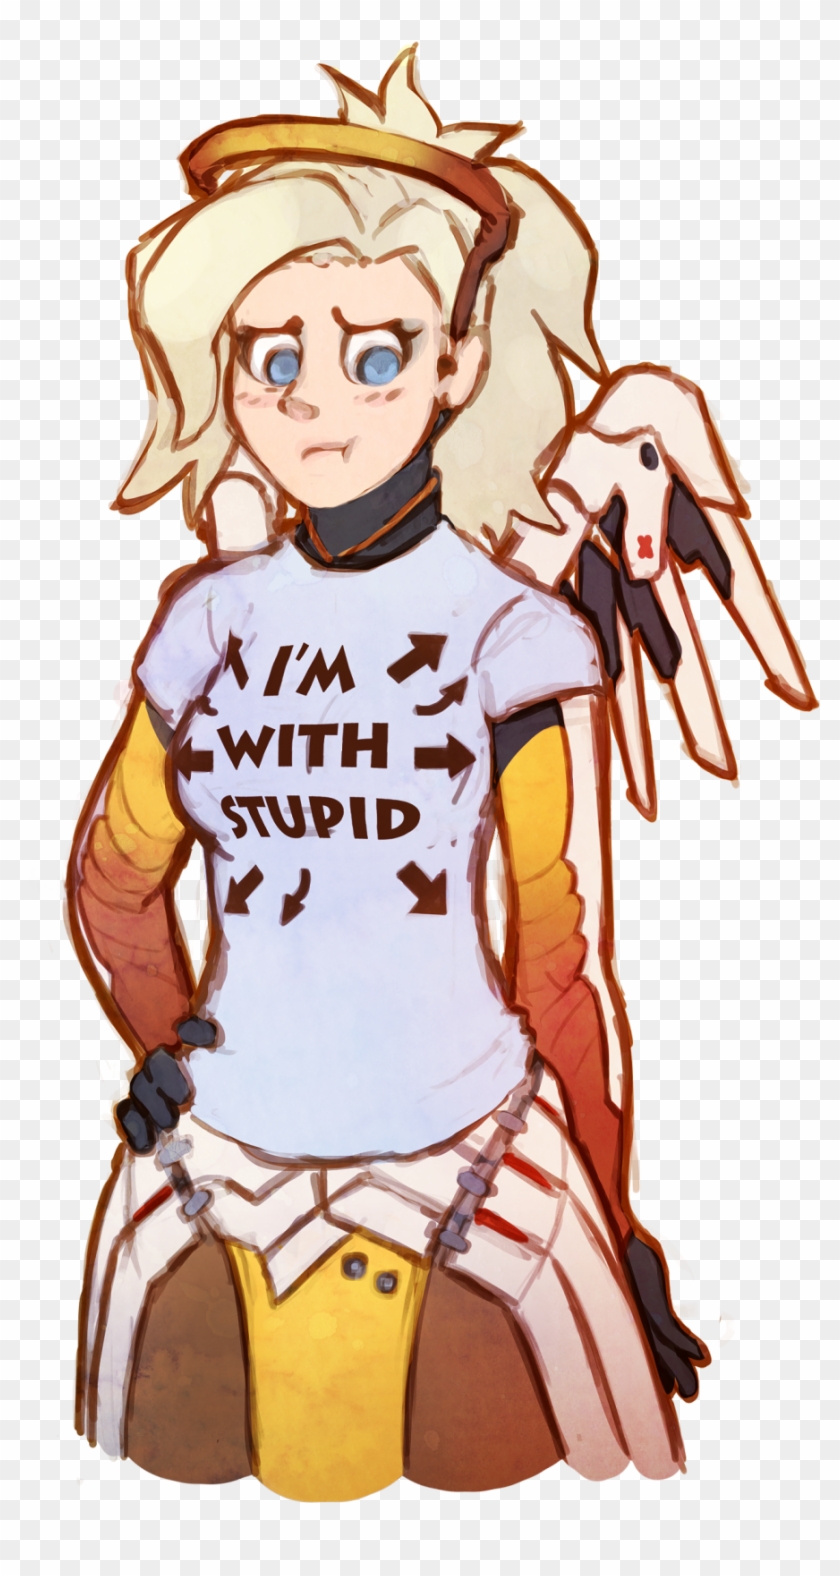 With Stupid Clothing Cartoon Fictional Character Illustration - Mercy Mains #619652